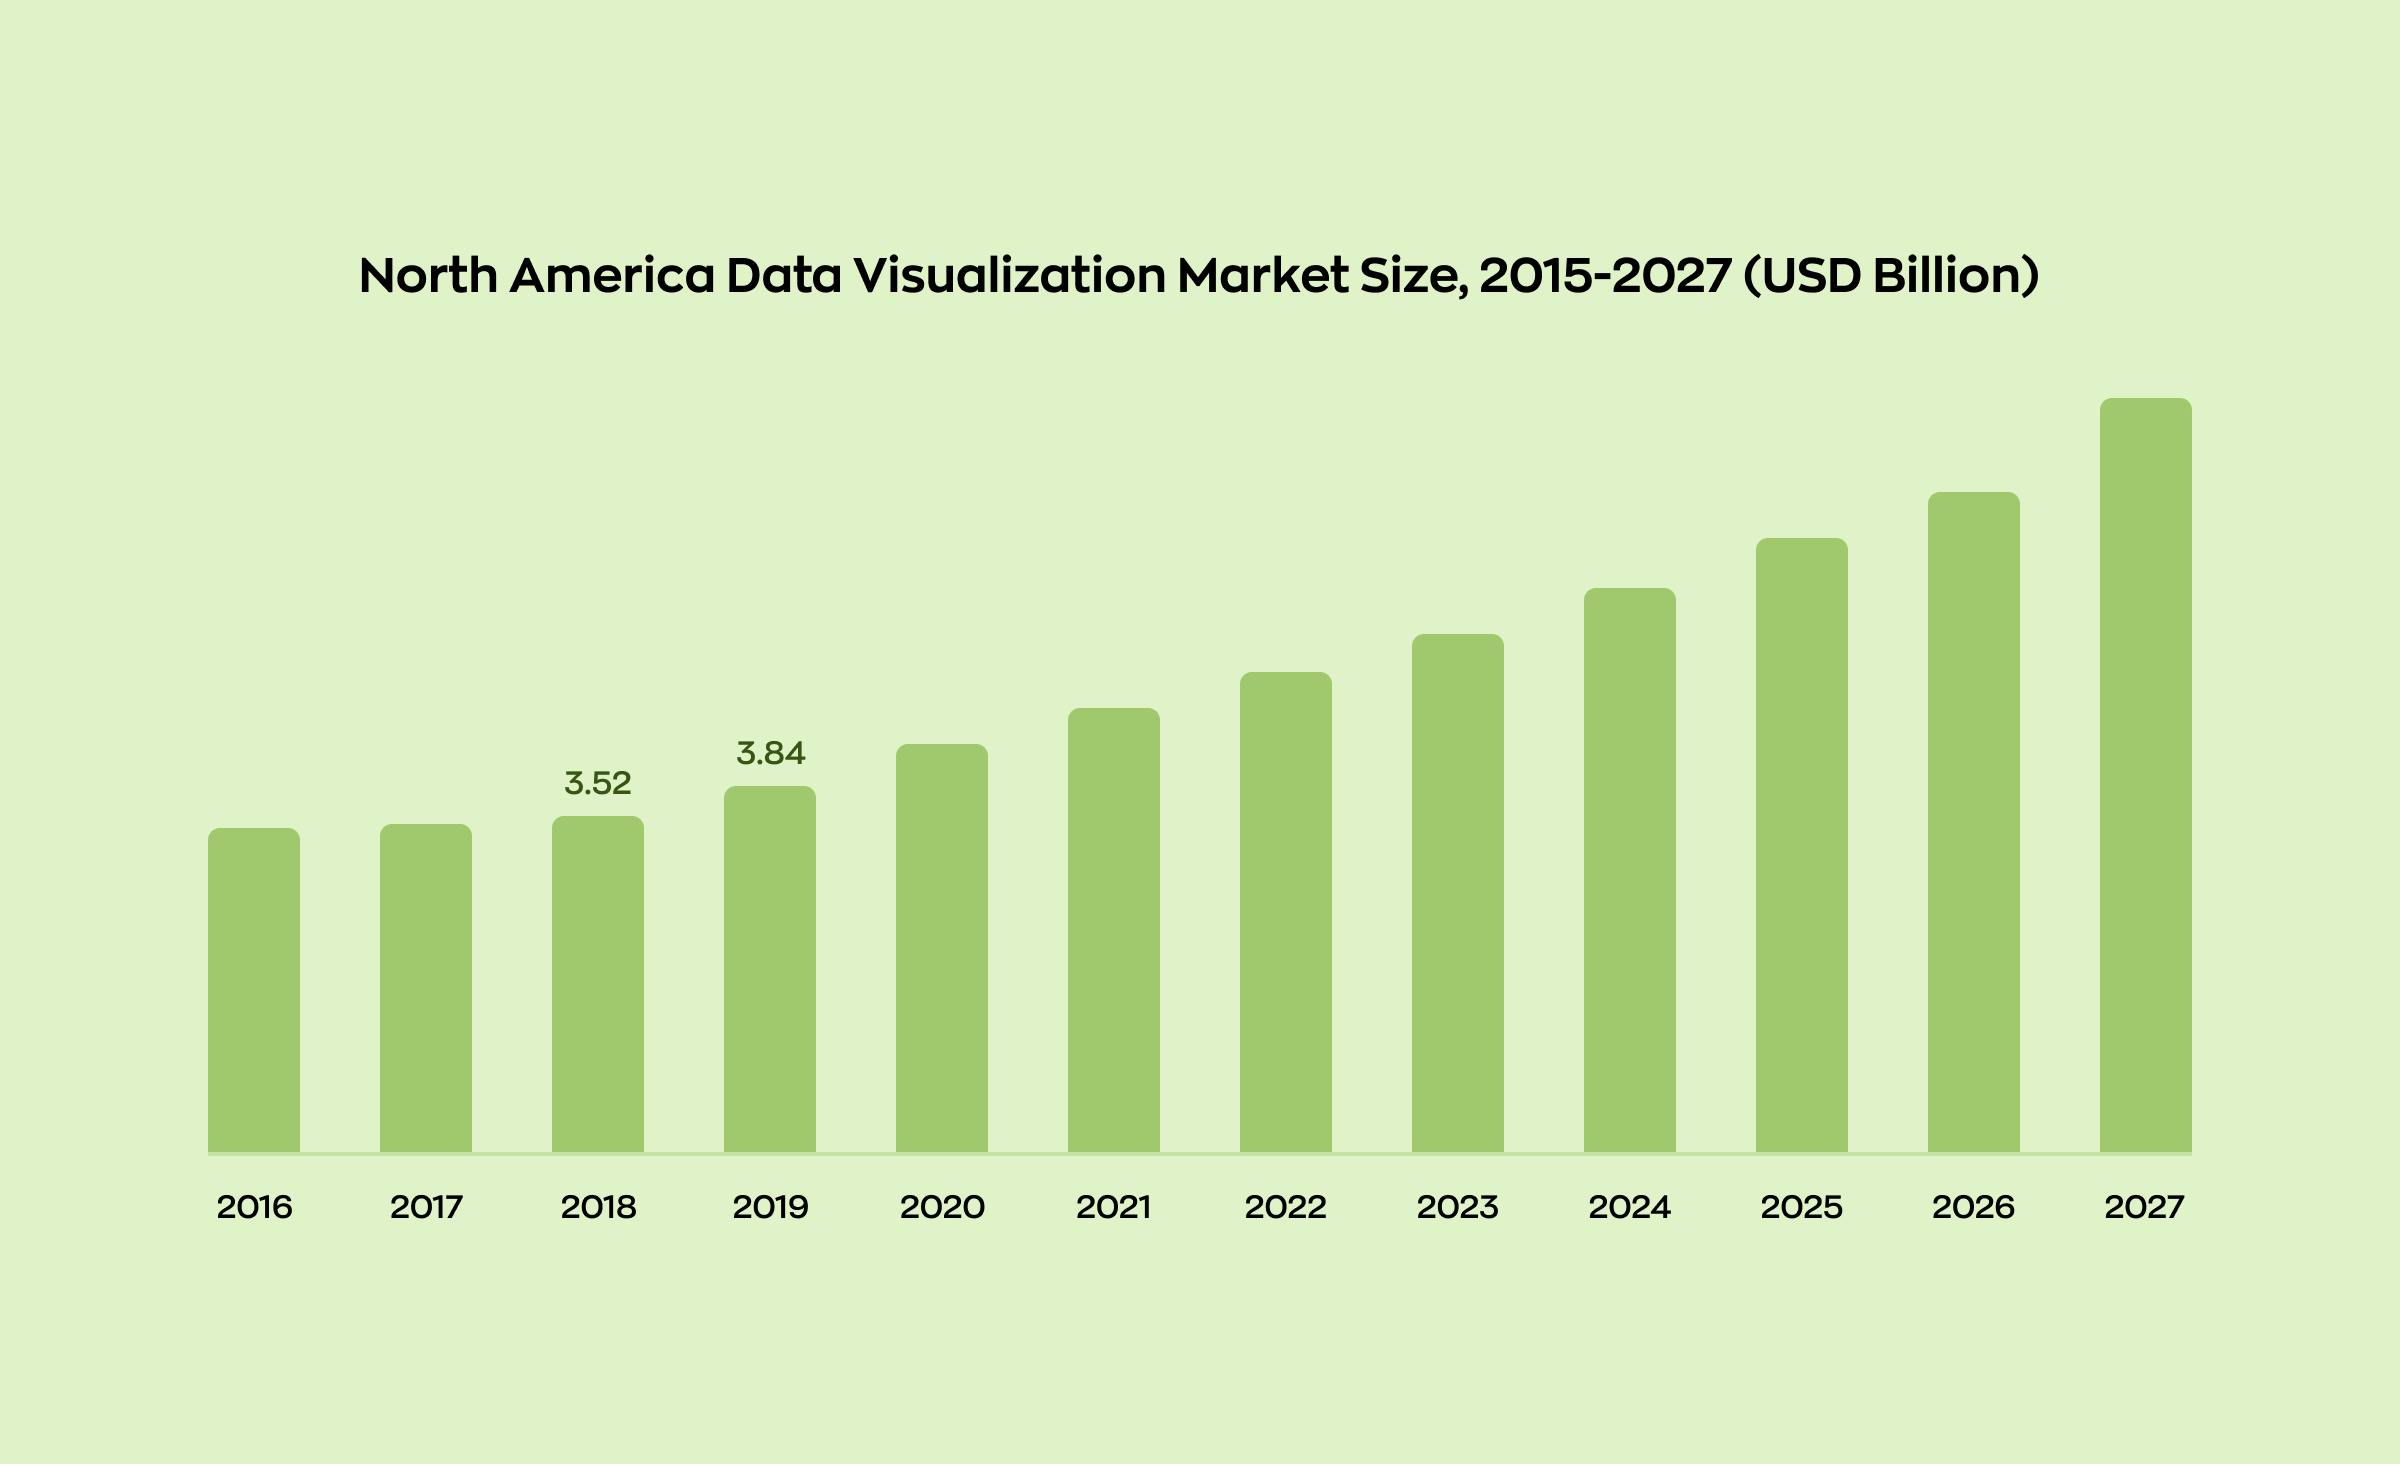 Visual representation of the North America data visualization market size, displaying $3.52 billion in 2018 and $3.84 billion in 2019, with projected growth in the future years.